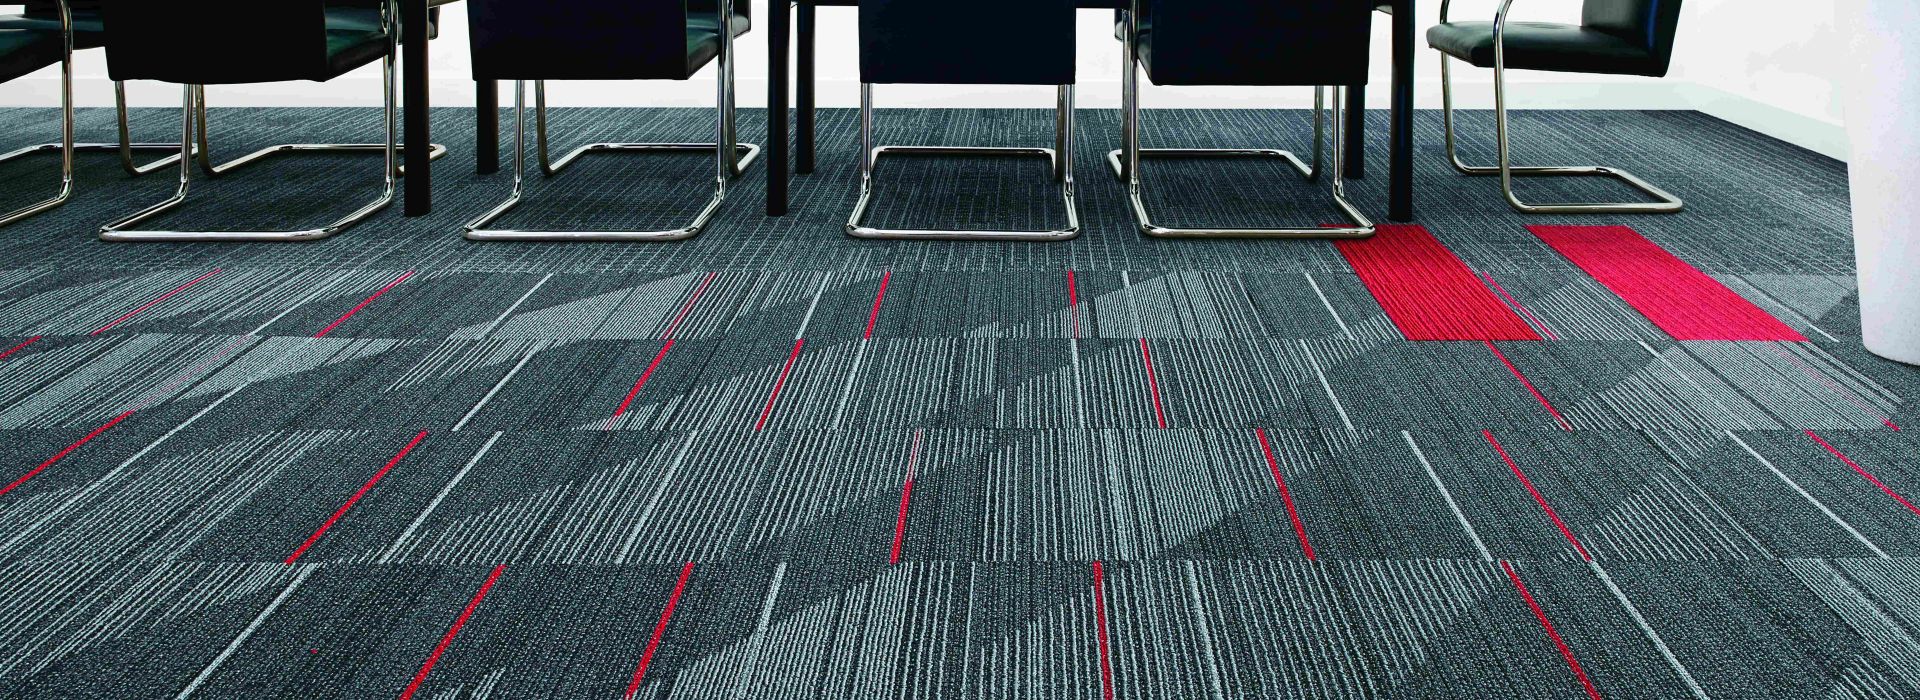 Interface CT111 and On Line plank carpet tile with Detours carpet tile in meeting room numéro d’image 1